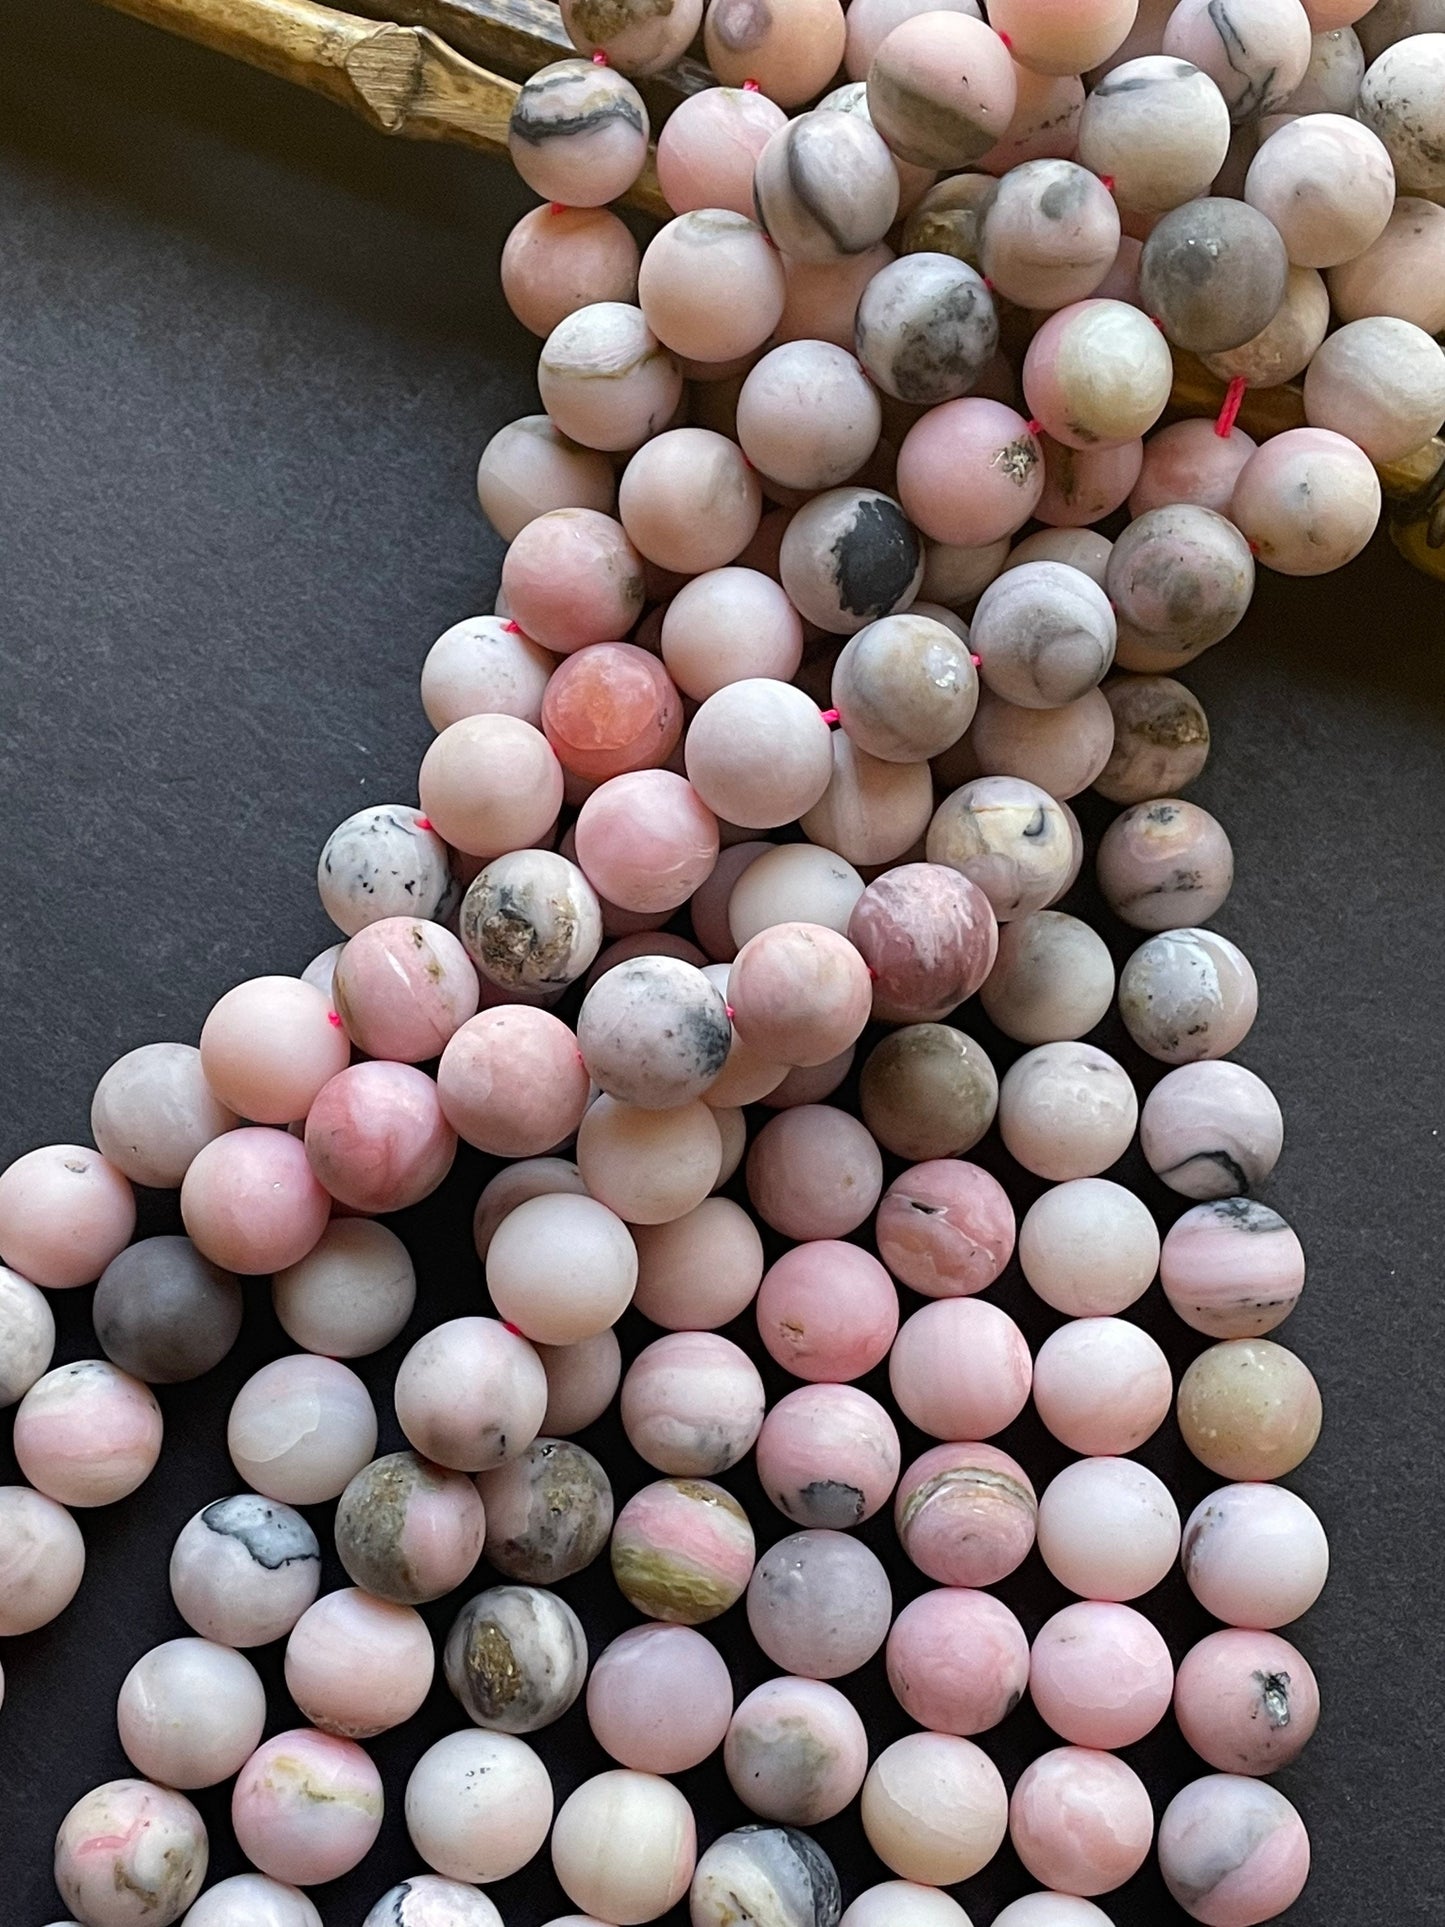 AAA Natural Pink Opal Gemstone Bead 6mm 8mm 10mm 12mm Matte Round Bead, Gorgeous Natural Pink Brown Color Pink Opal Gemstone Bead Full Strand 15.5"